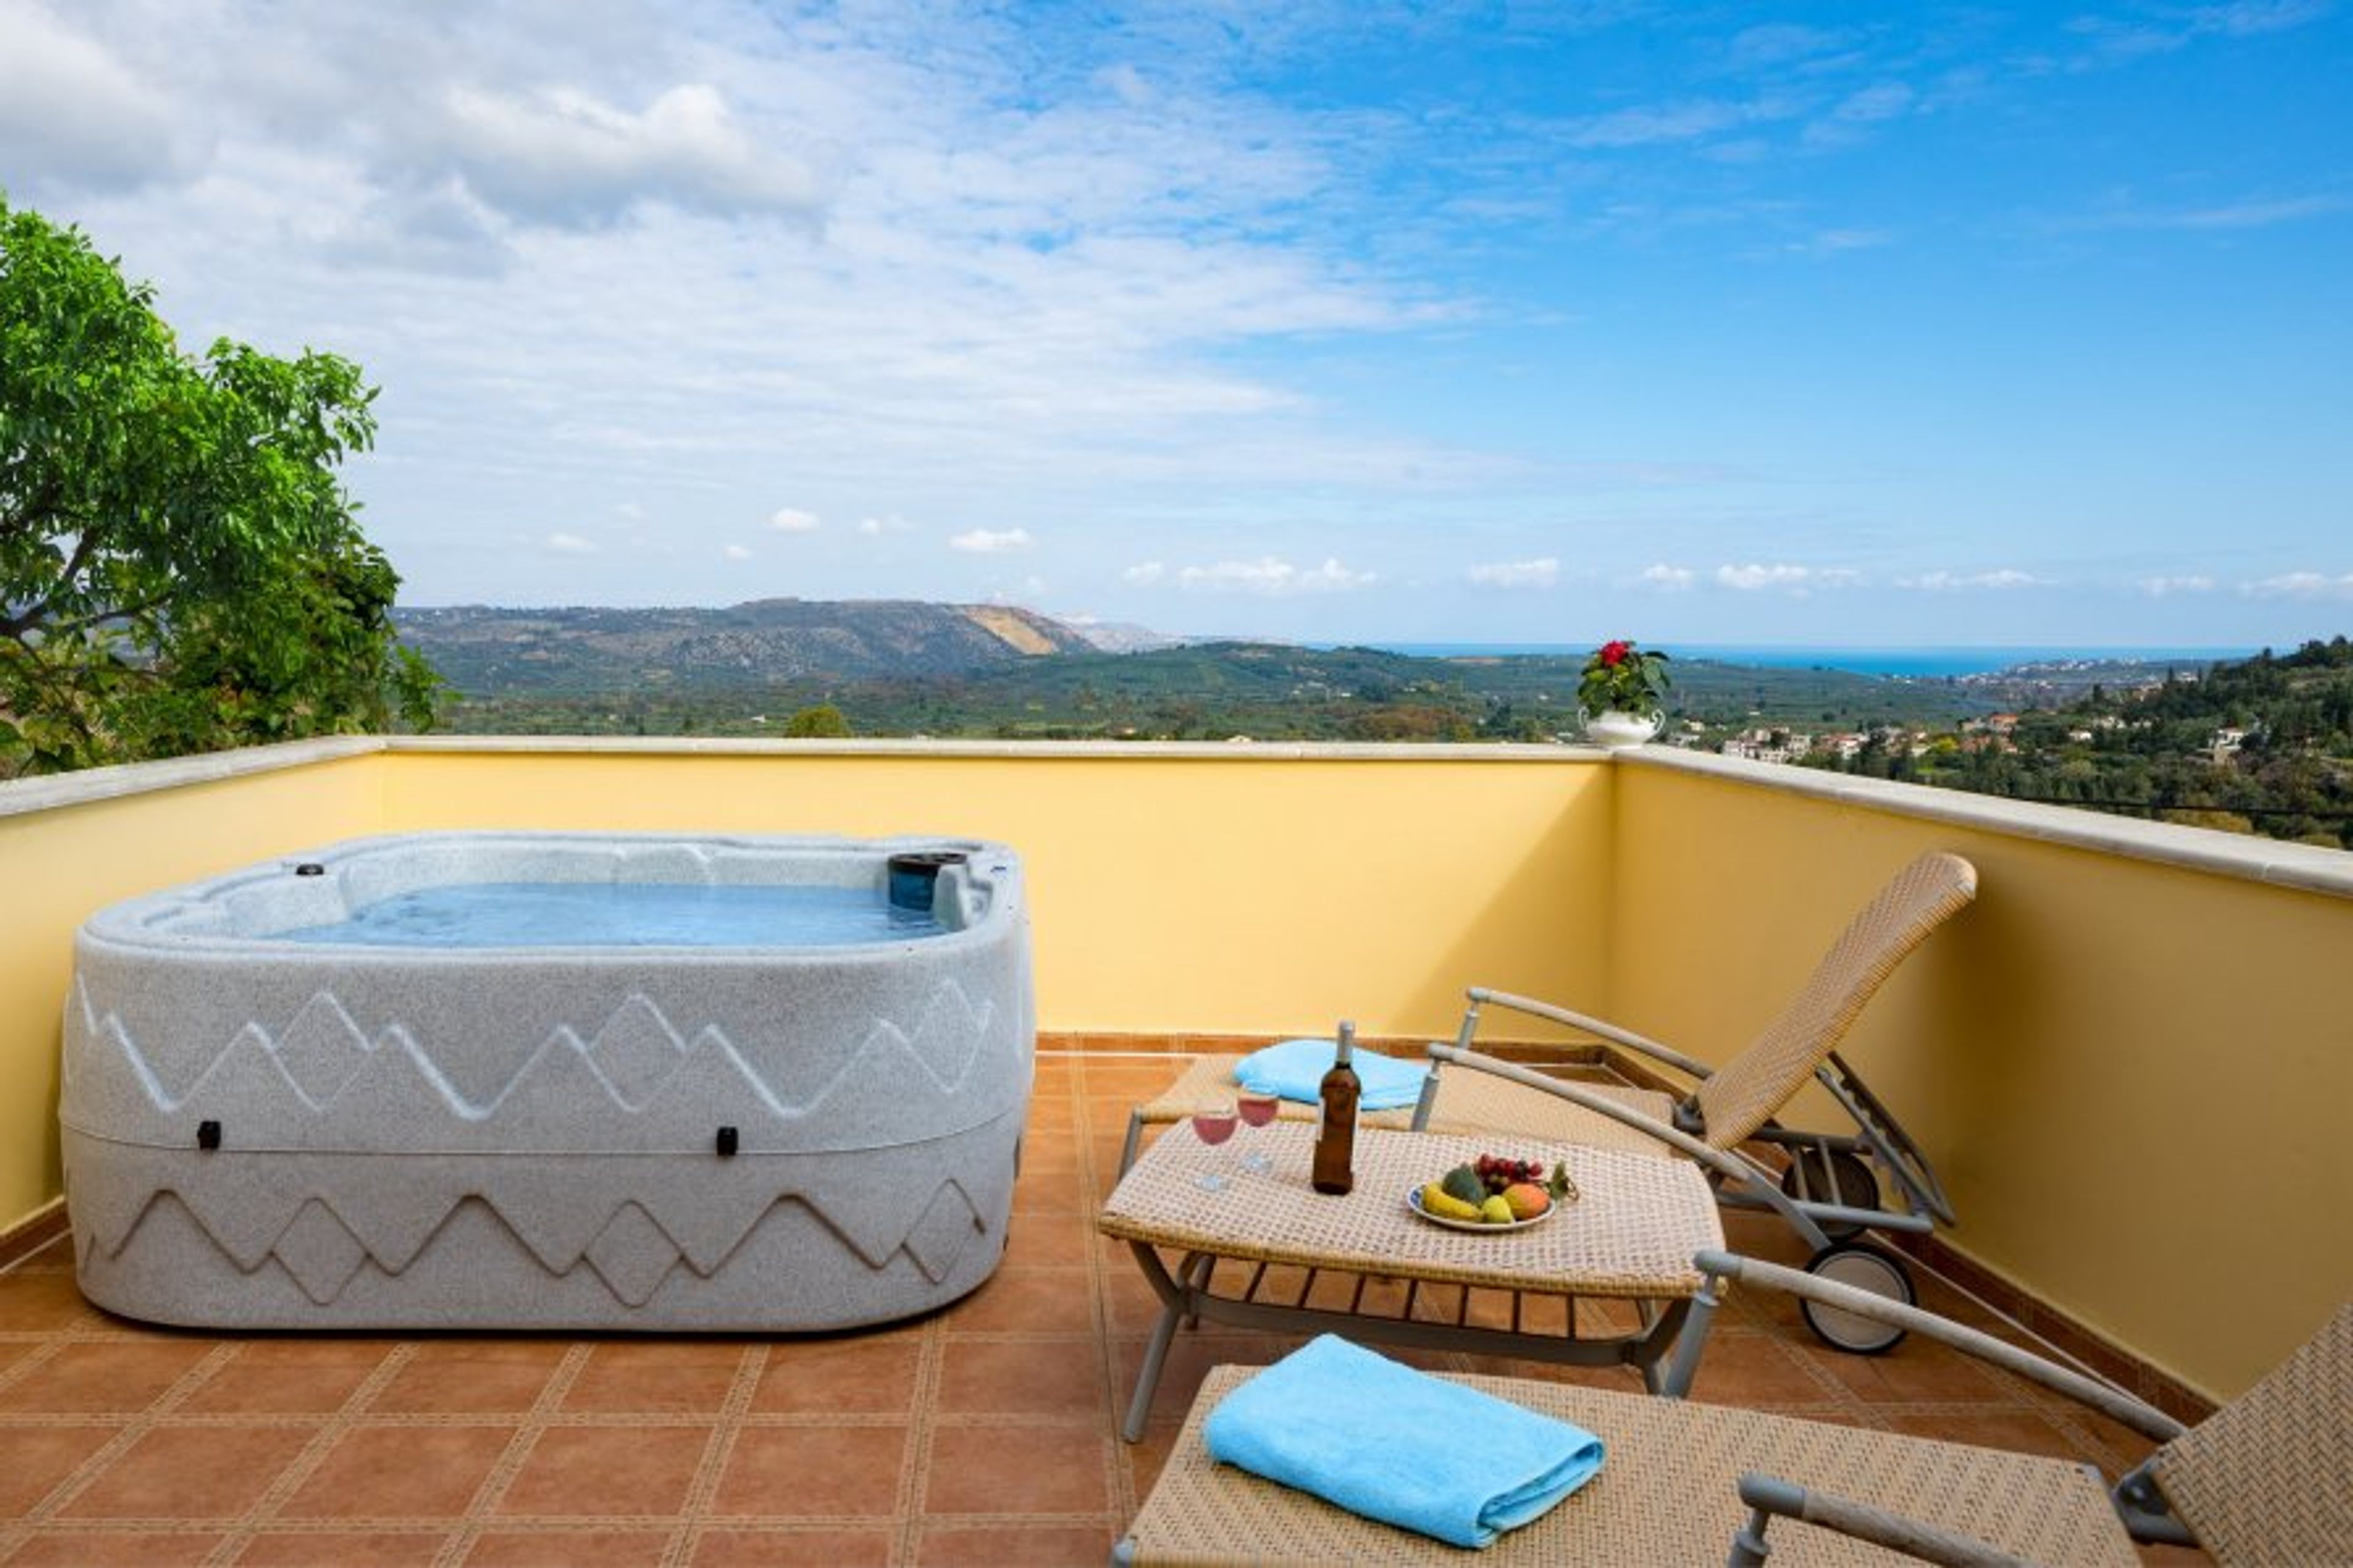 private heated jacuzzi on the terrace with amazing view